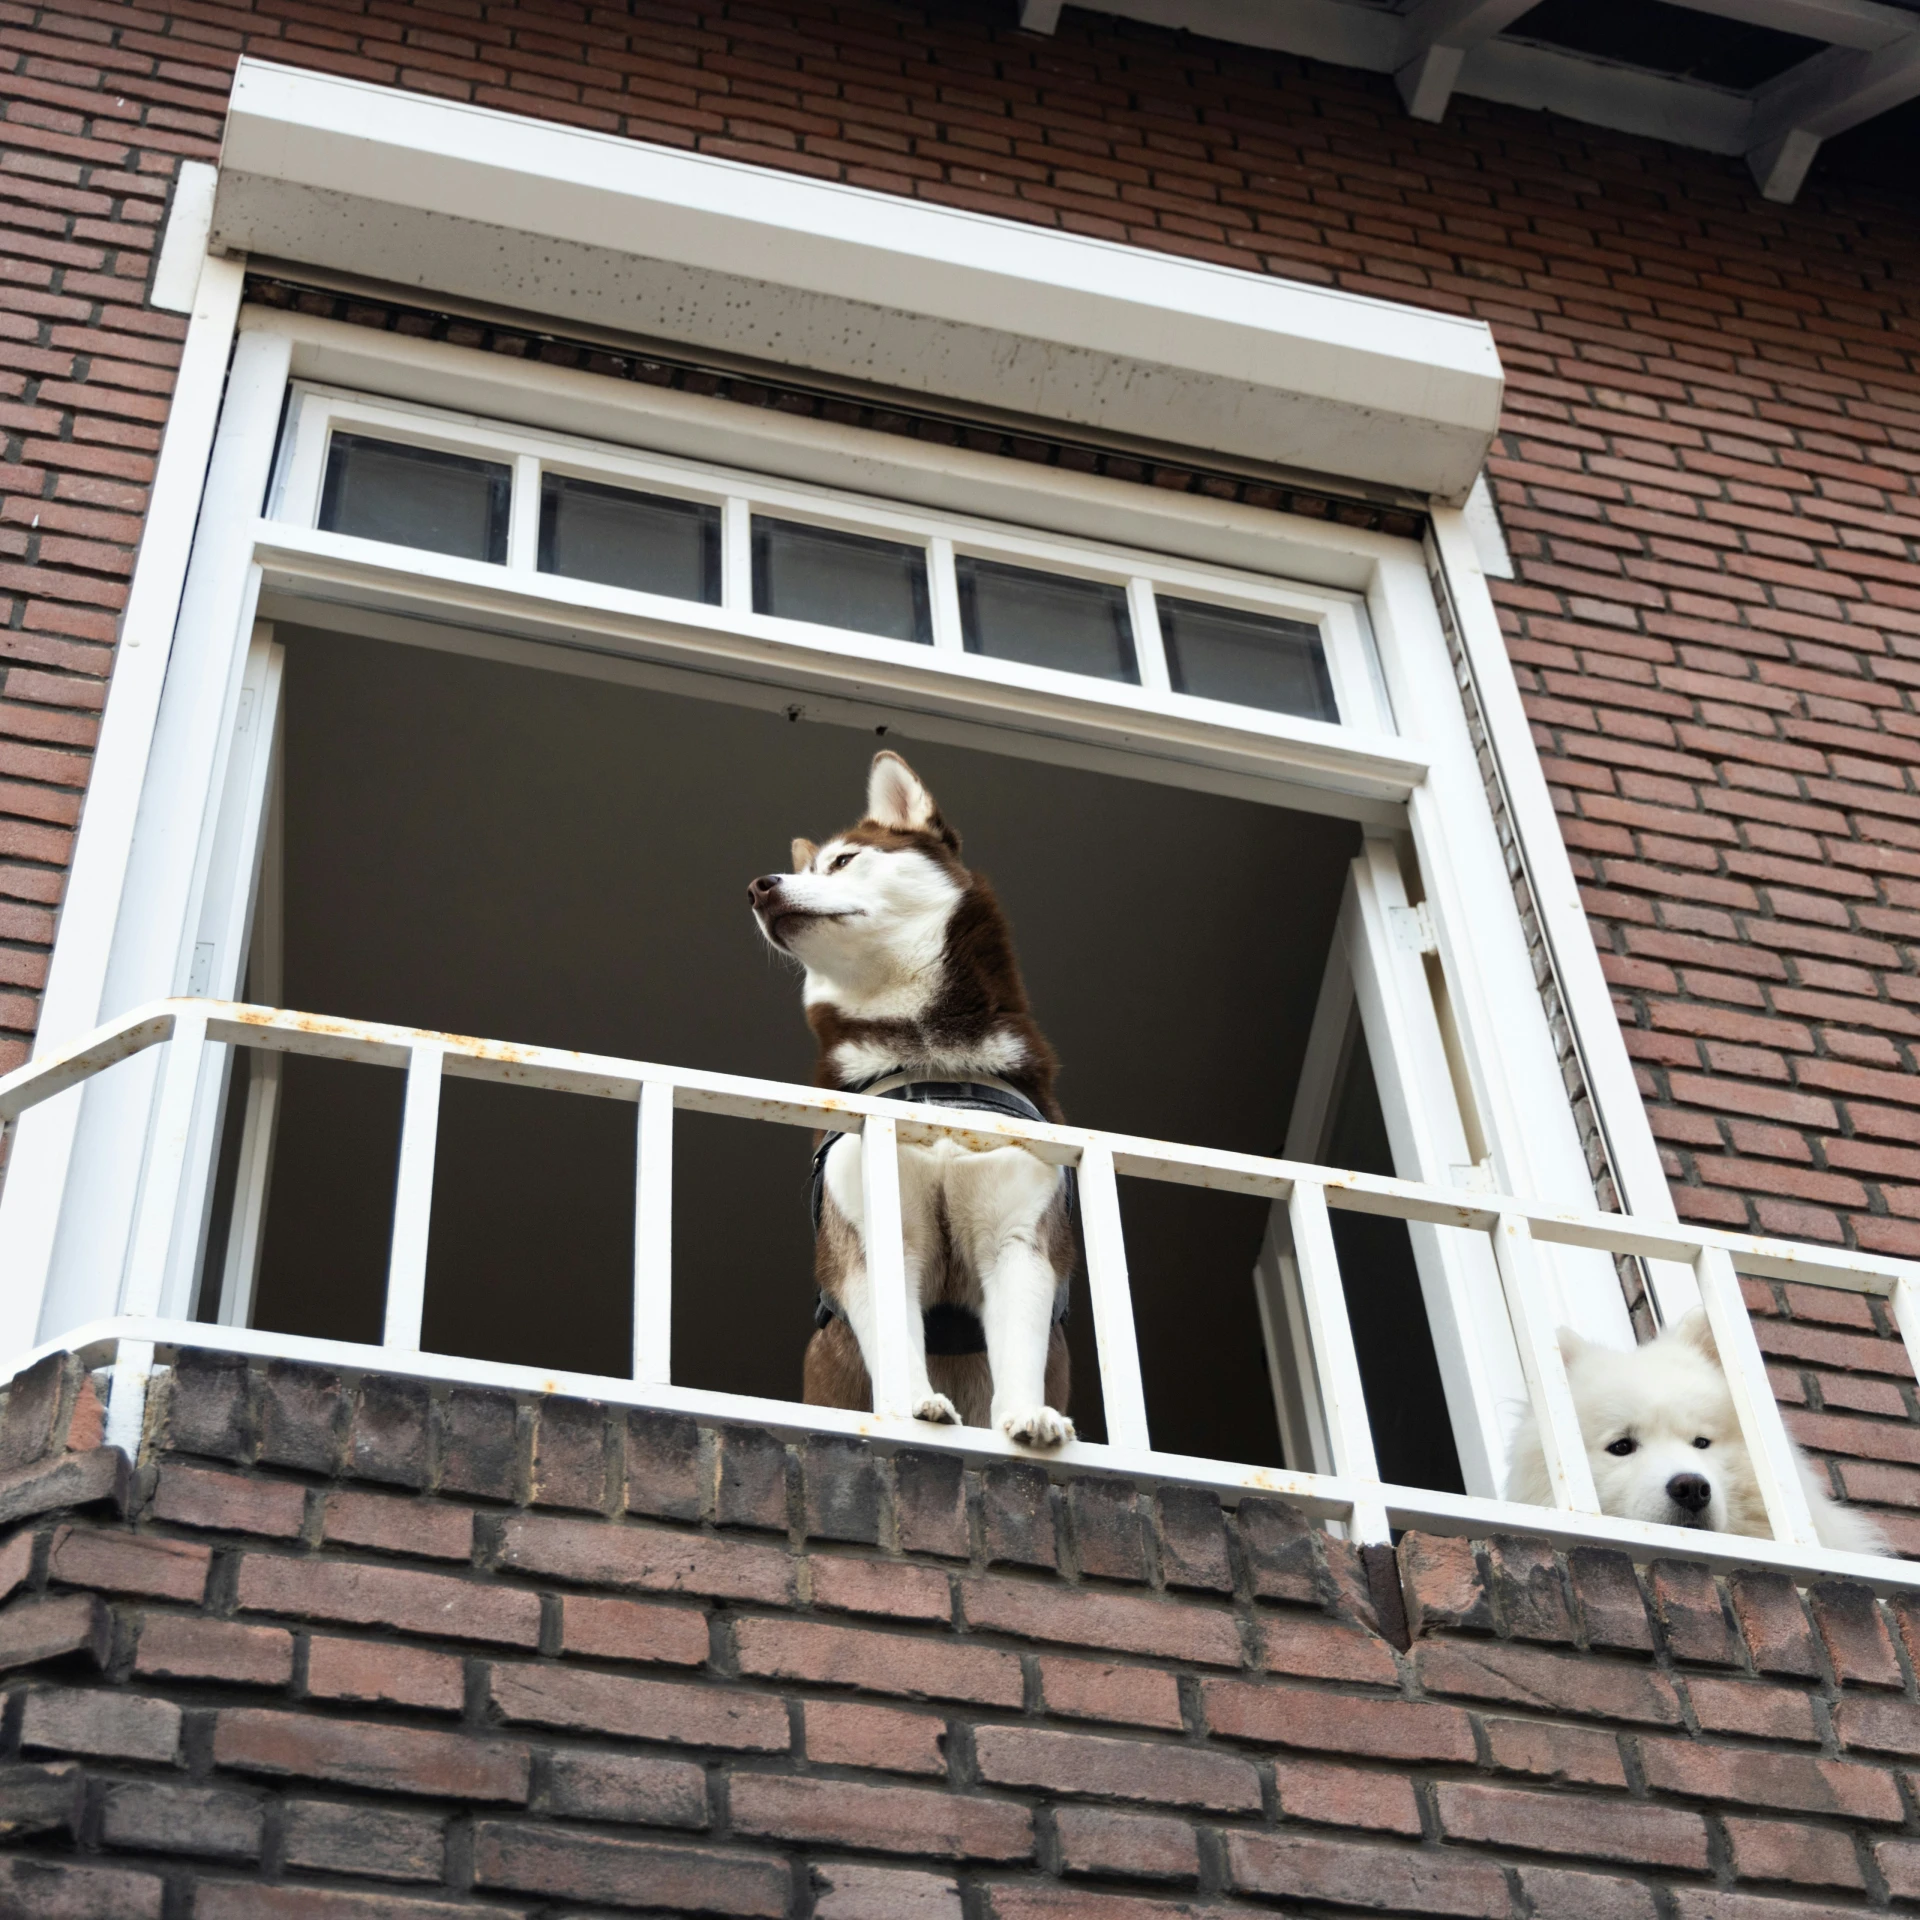 a dog looking out the window of a brick building